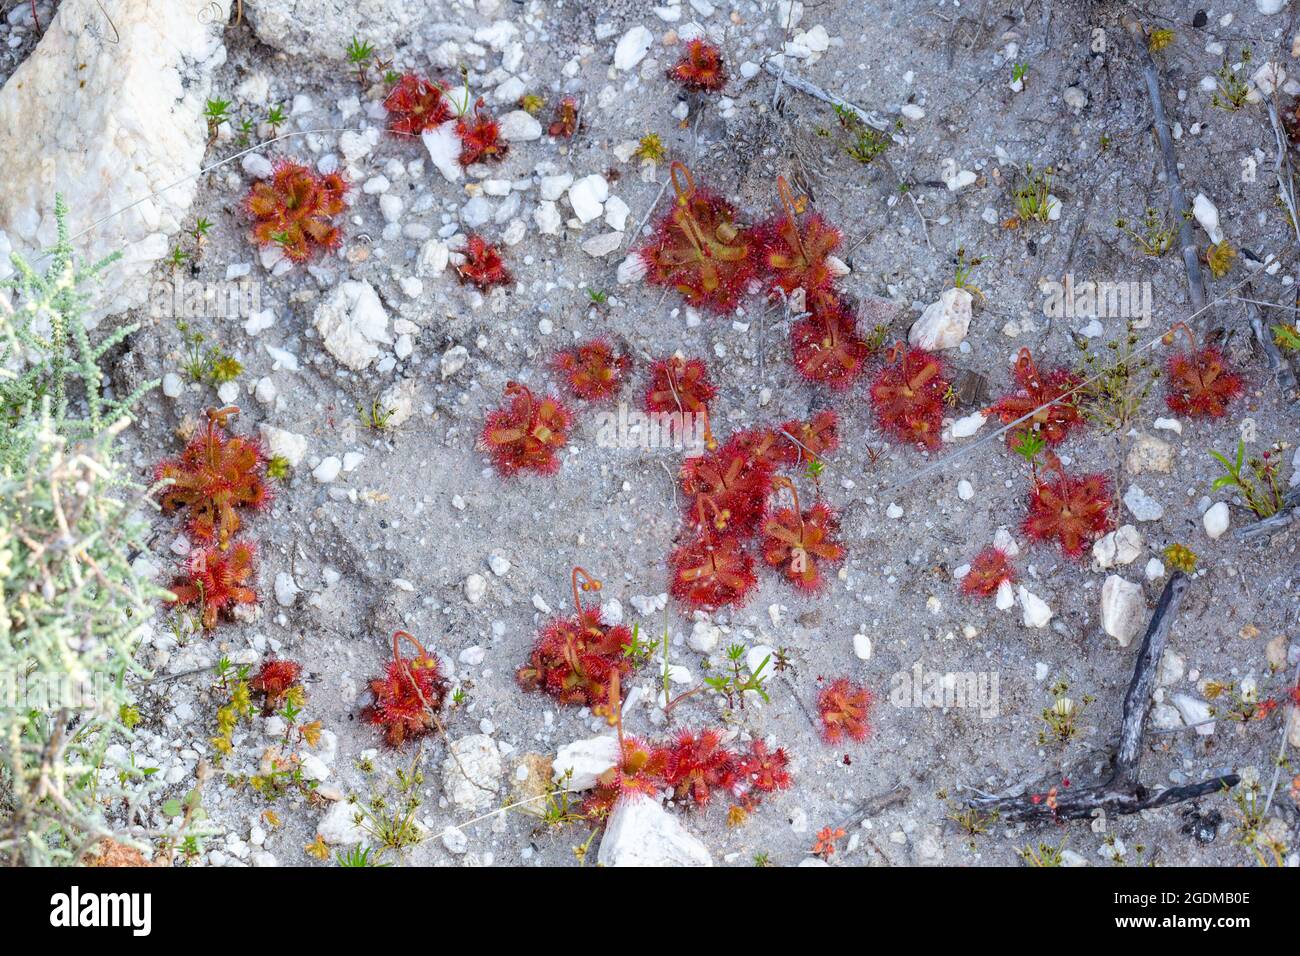 Some red rosettes of the carnivorous plant Drosera trinervia seen near Tulbagh in the Western Cape of South Africa Stock Photo